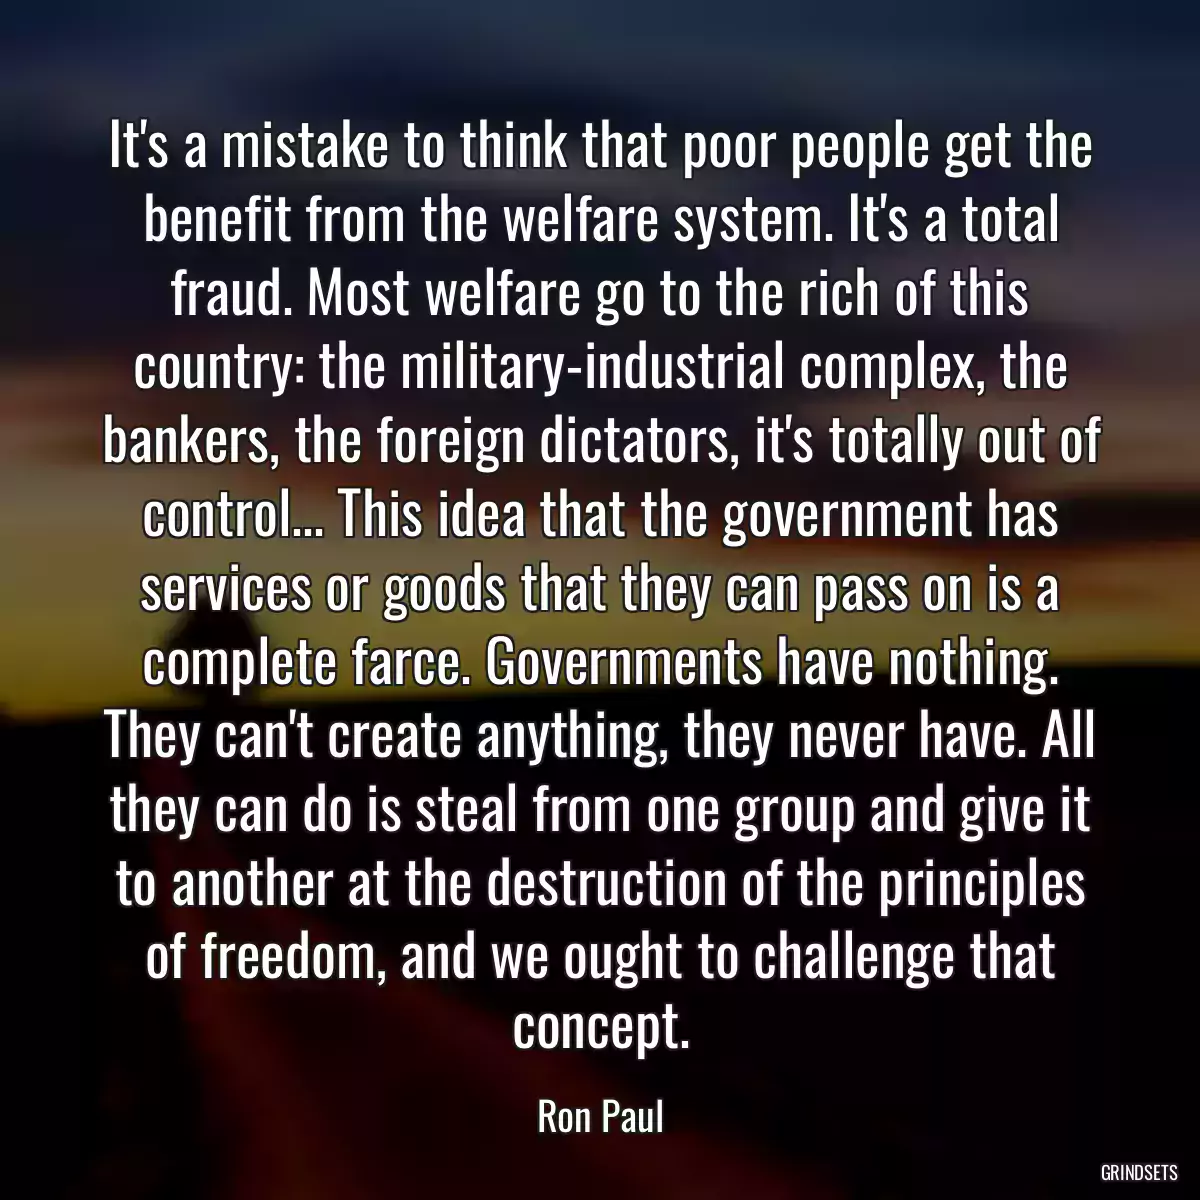 It\'s a mistake to think that poor people get the benefit from the welfare system. It\'s a total fraud. Most welfare go to the rich of this country: the military-industrial complex, the bankers, the foreign dictators, it\'s totally out of control... This idea that the government has services or goods that they can pass on is a complete farce. Governments have nothing. They can\'t create anything, they never have. All they can do is steal from one group and give it to another at the destruction of the principles of freedom, and we ought to challenge that concept.